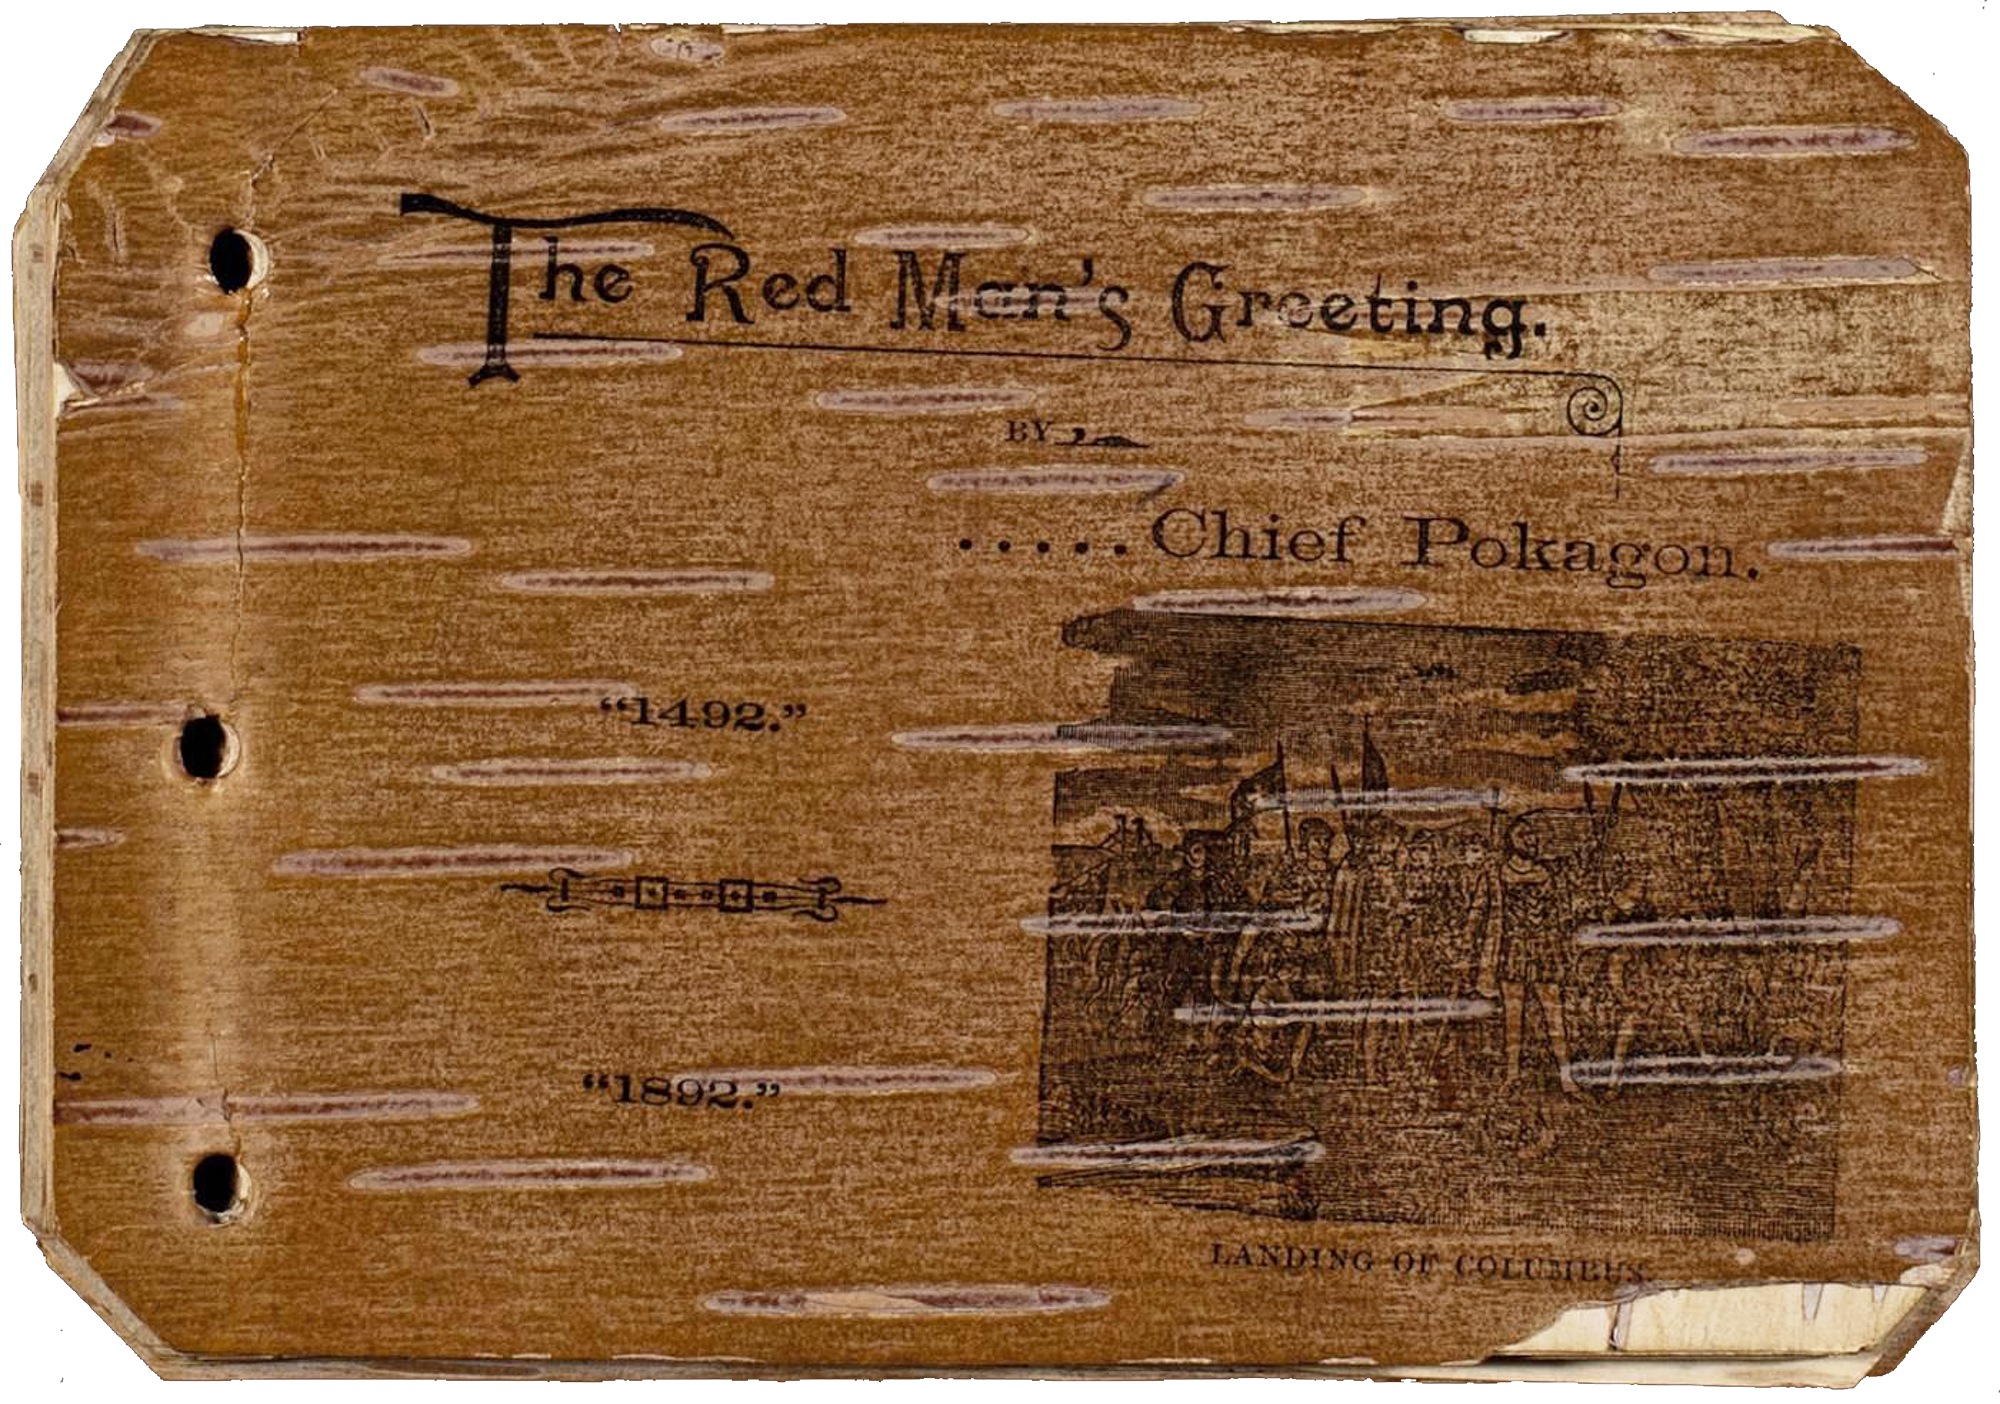 Simon Pokagon sold his birch bark booklet, “The Red Man’s Greeting,” at the 1893 World’s Columbian Exposition. At the fair, he delivered a speech arguing that America needed to make room for Native Americans as part of the American Dream. (The Red Man's greeting, 1492-1892, by Chief Pokagon, c1893. Call number: Ayer 251 .P651 P7 1893. Courtesy The Newberry Library, Chicago.)